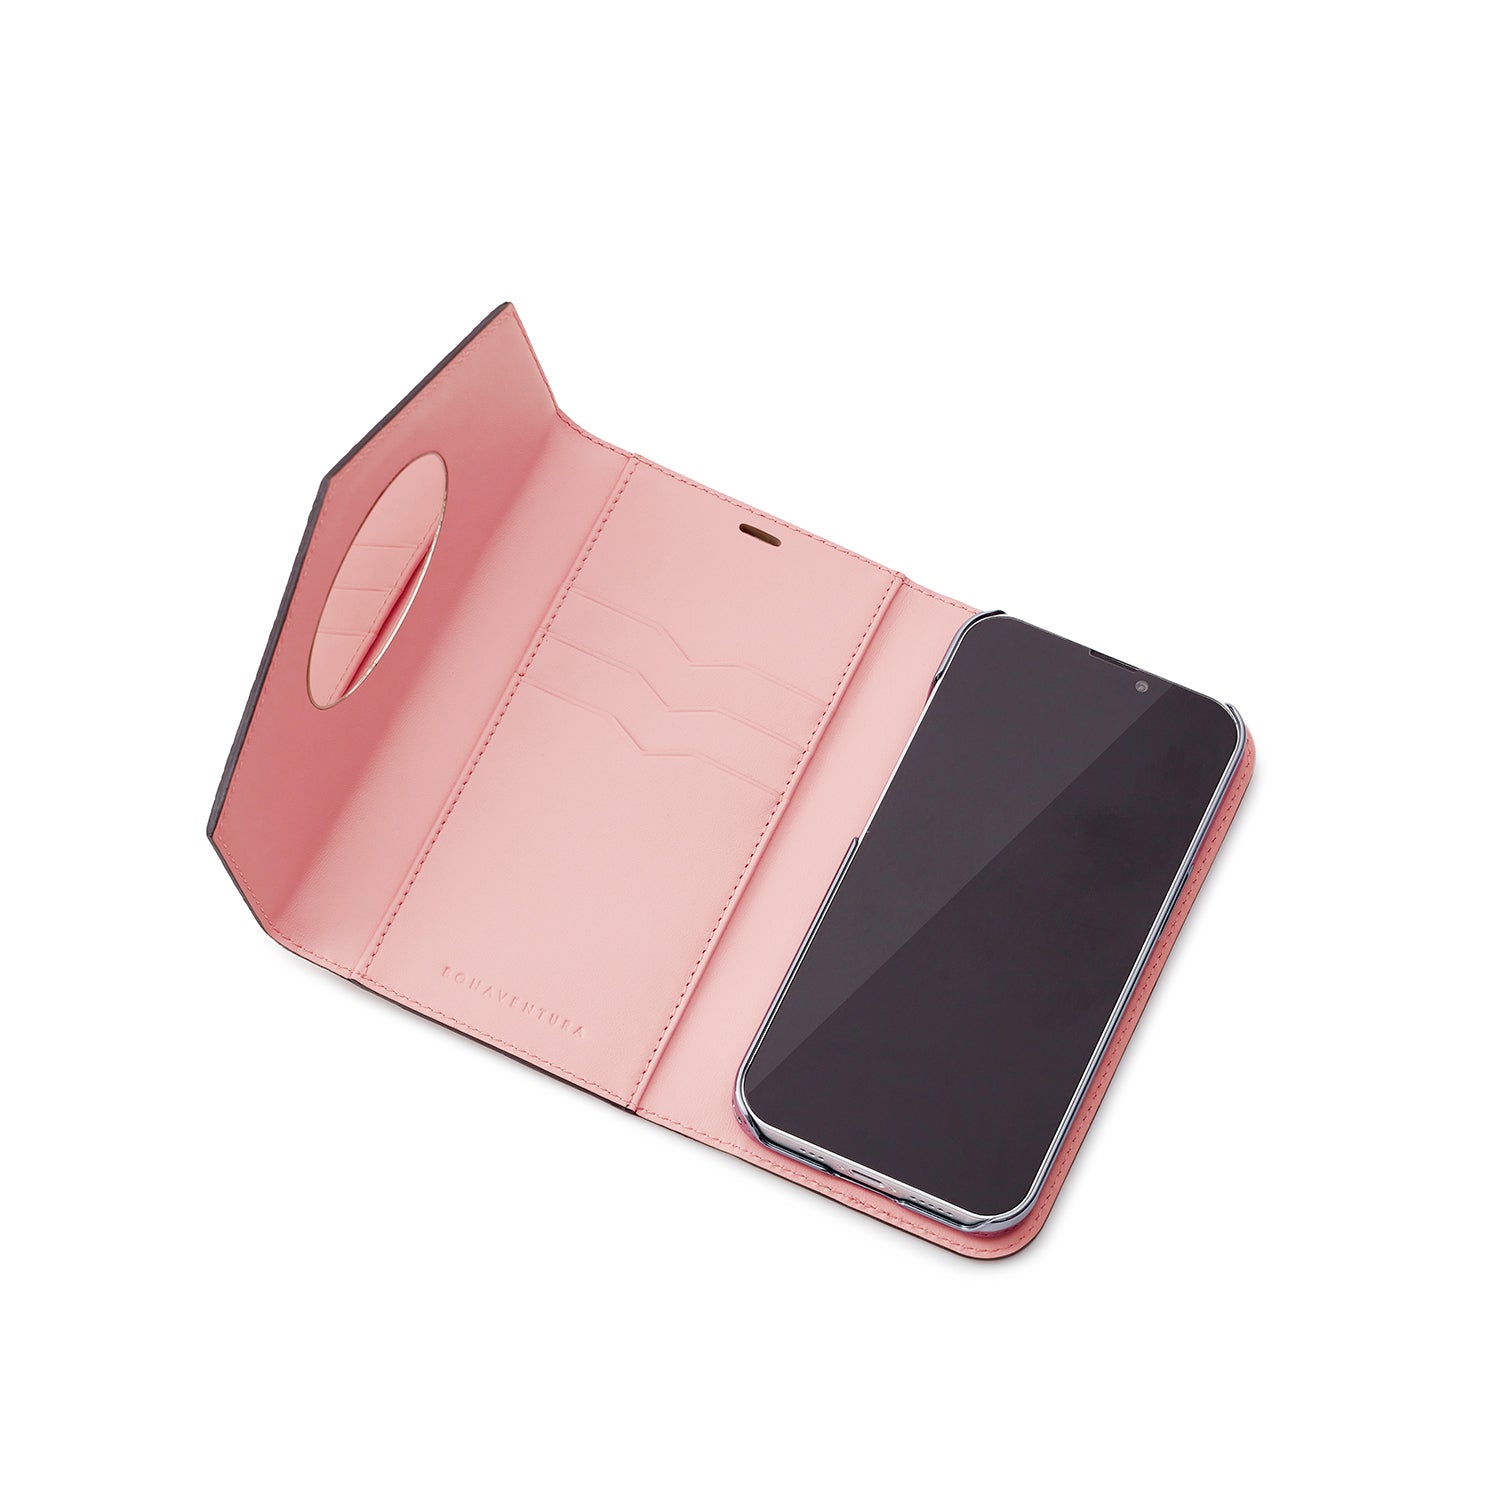 (iPhone 13) Mirror case with shoulder strap